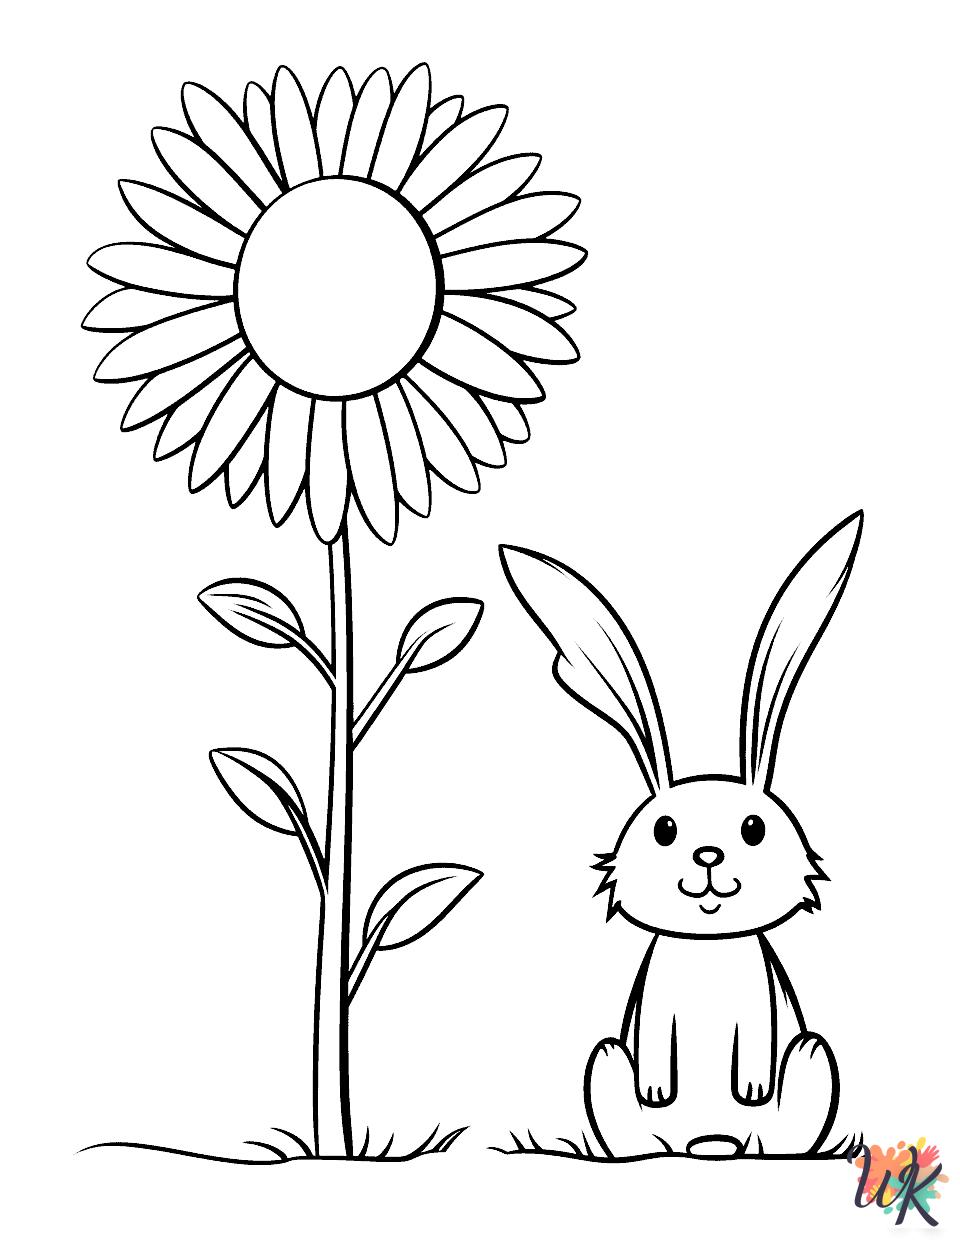 Rabbits coloring pages grinch